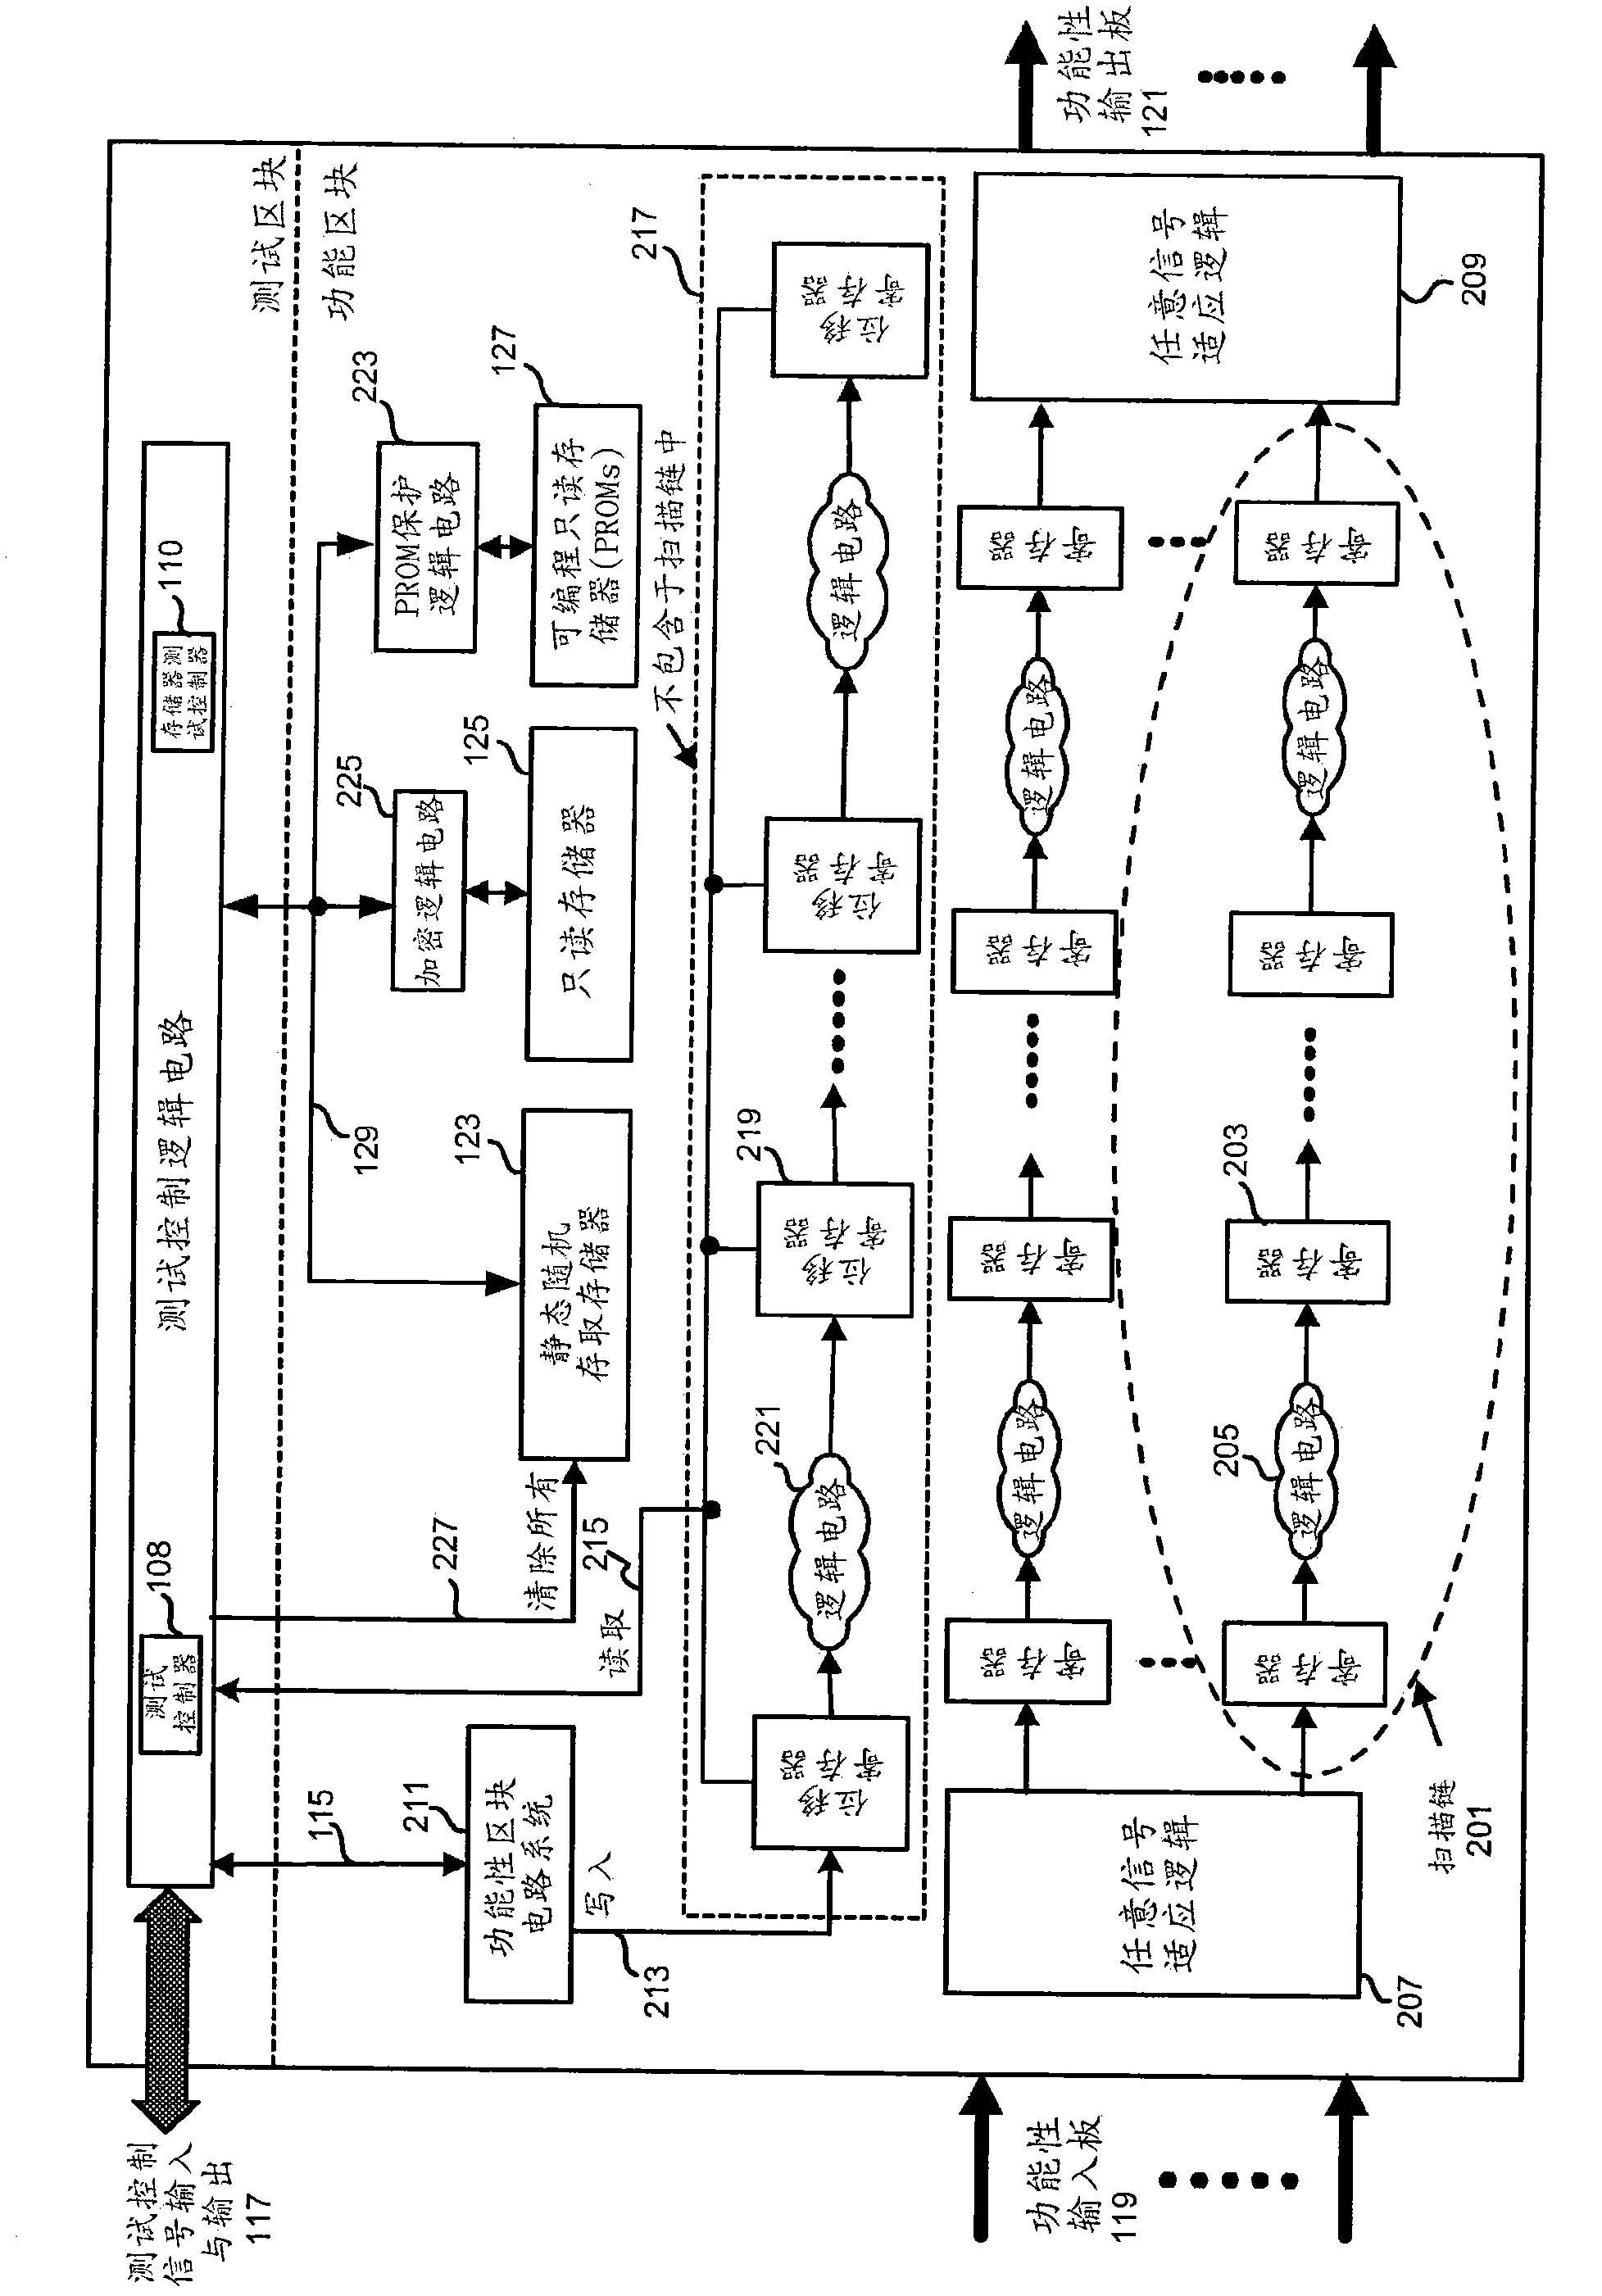 Method and apparatus for securing digital information on an integrated circuit during test operating modes